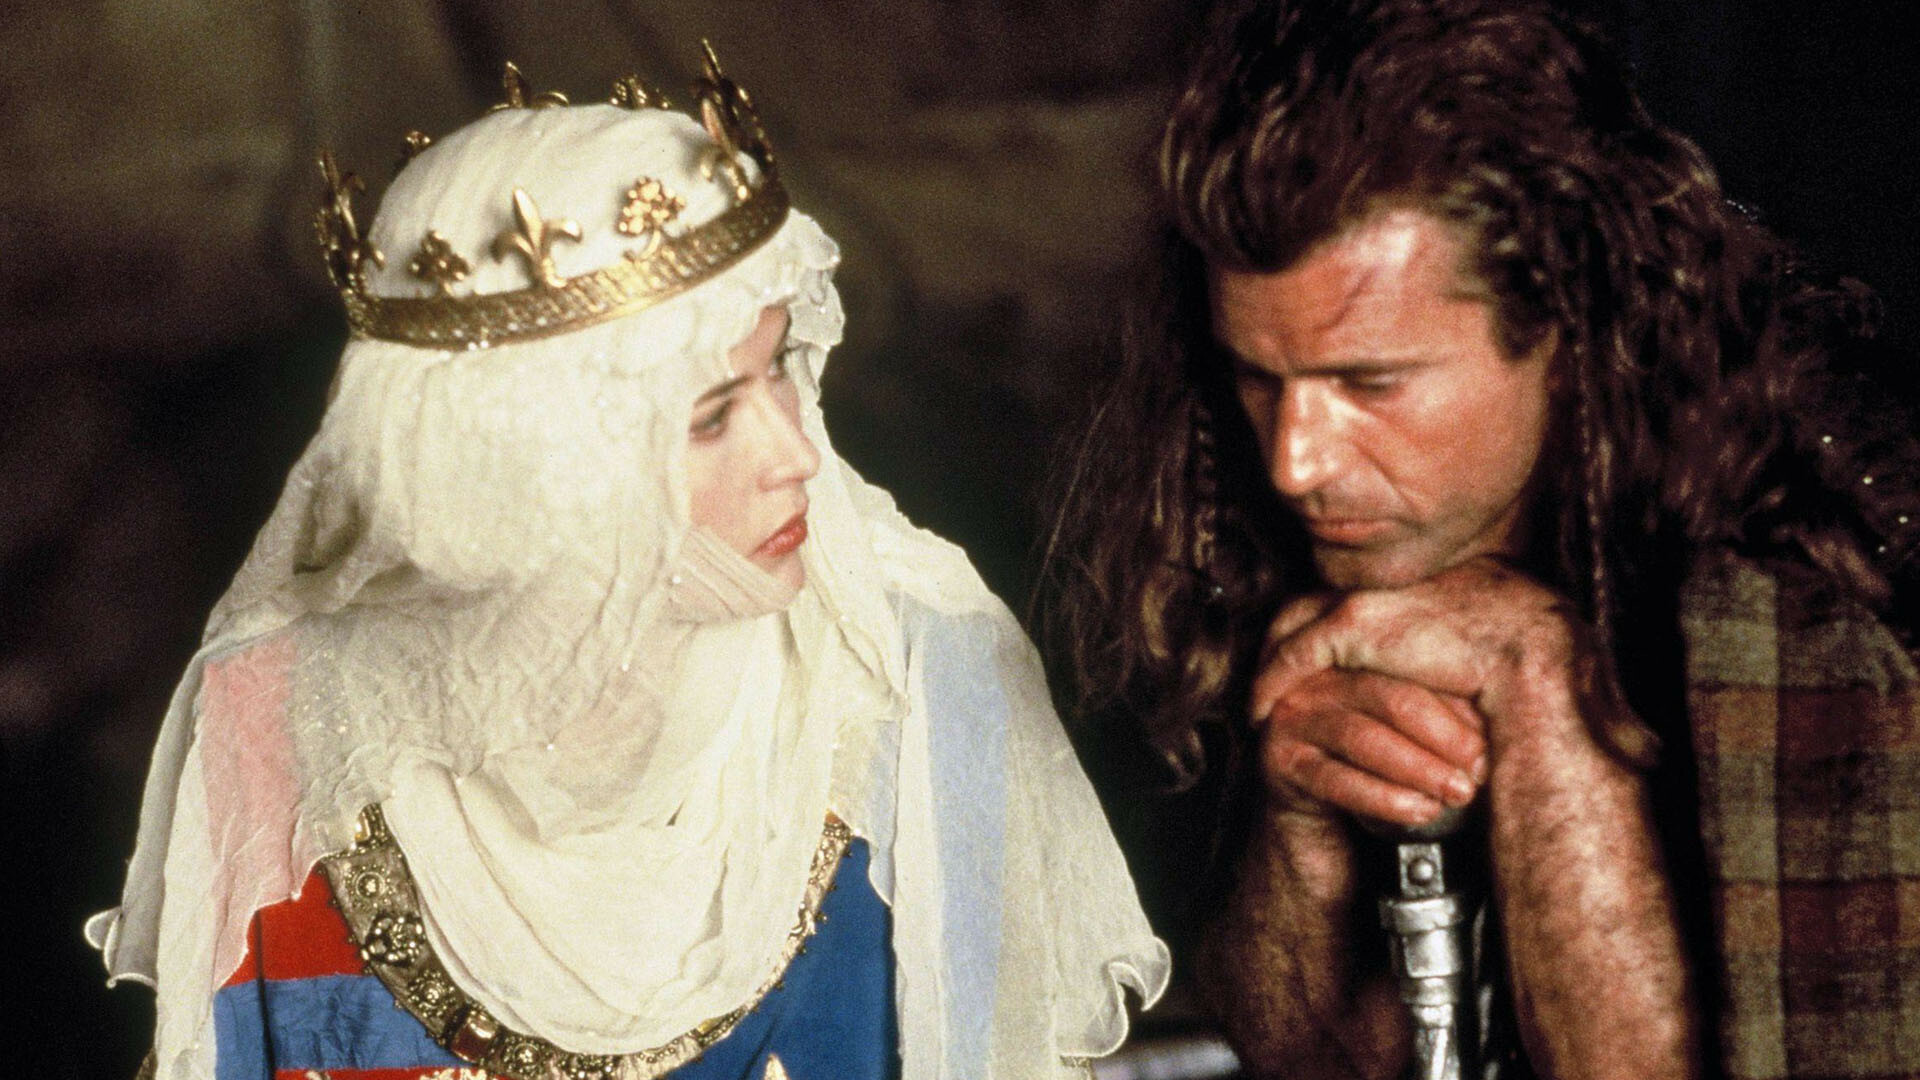 Braveheart: Mel Gibson and Sophie Marceau, The movie was released on May 24, 1995. 1920x1080 Full HD Background.